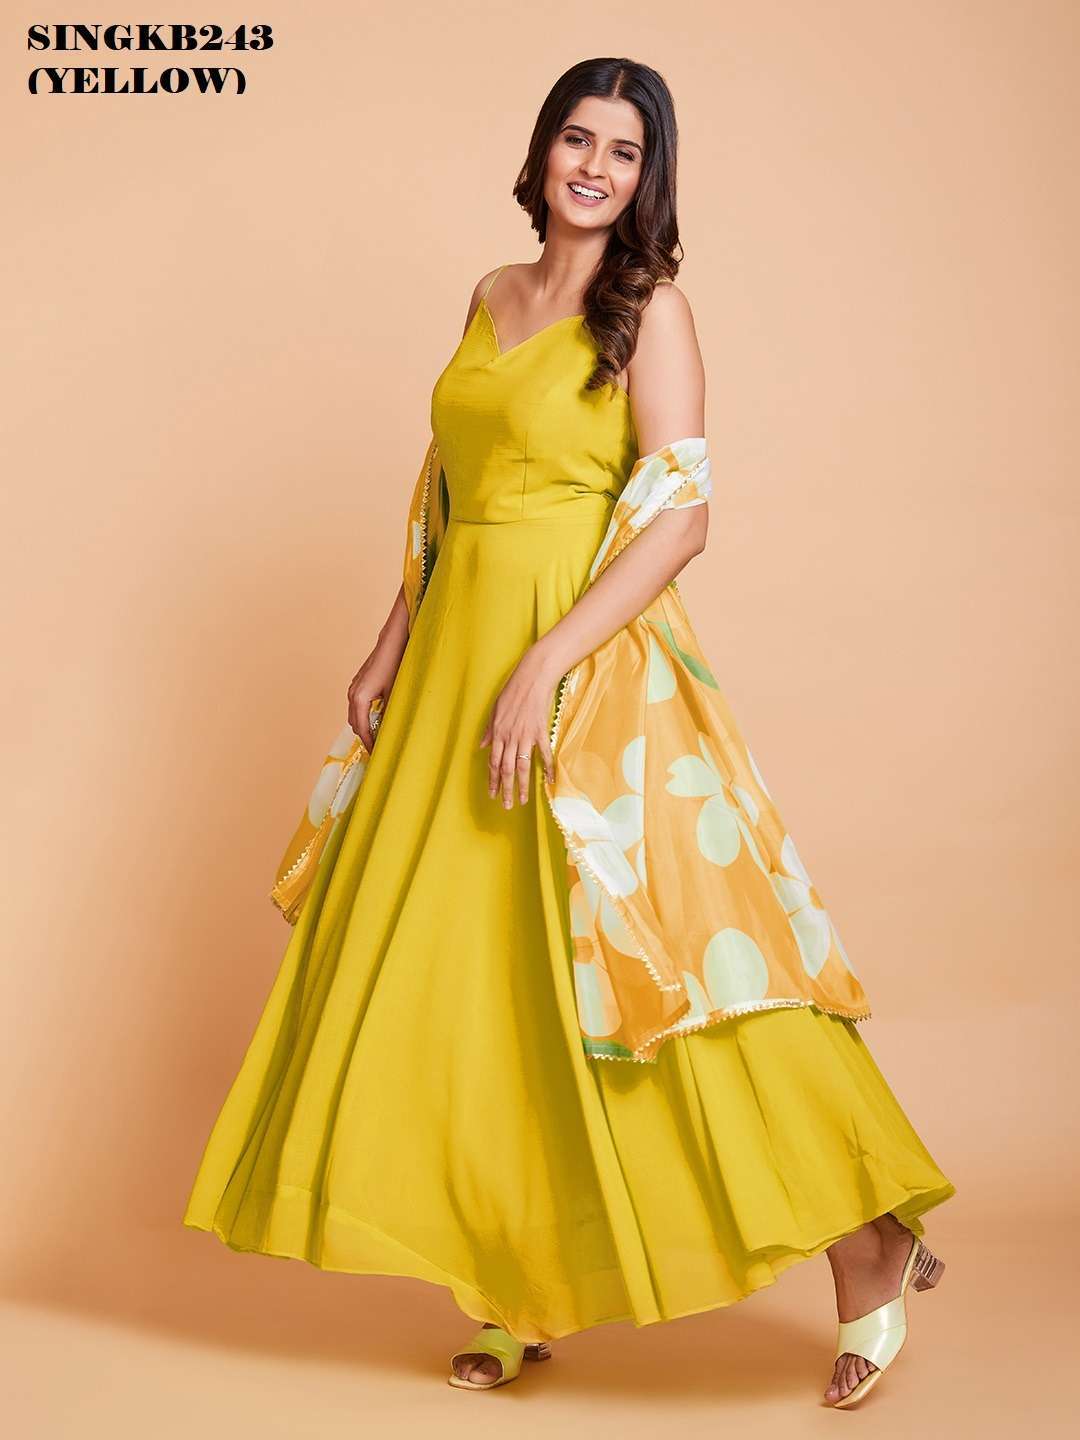 arya singkb243 yellow color fancy long gown with dupatta 